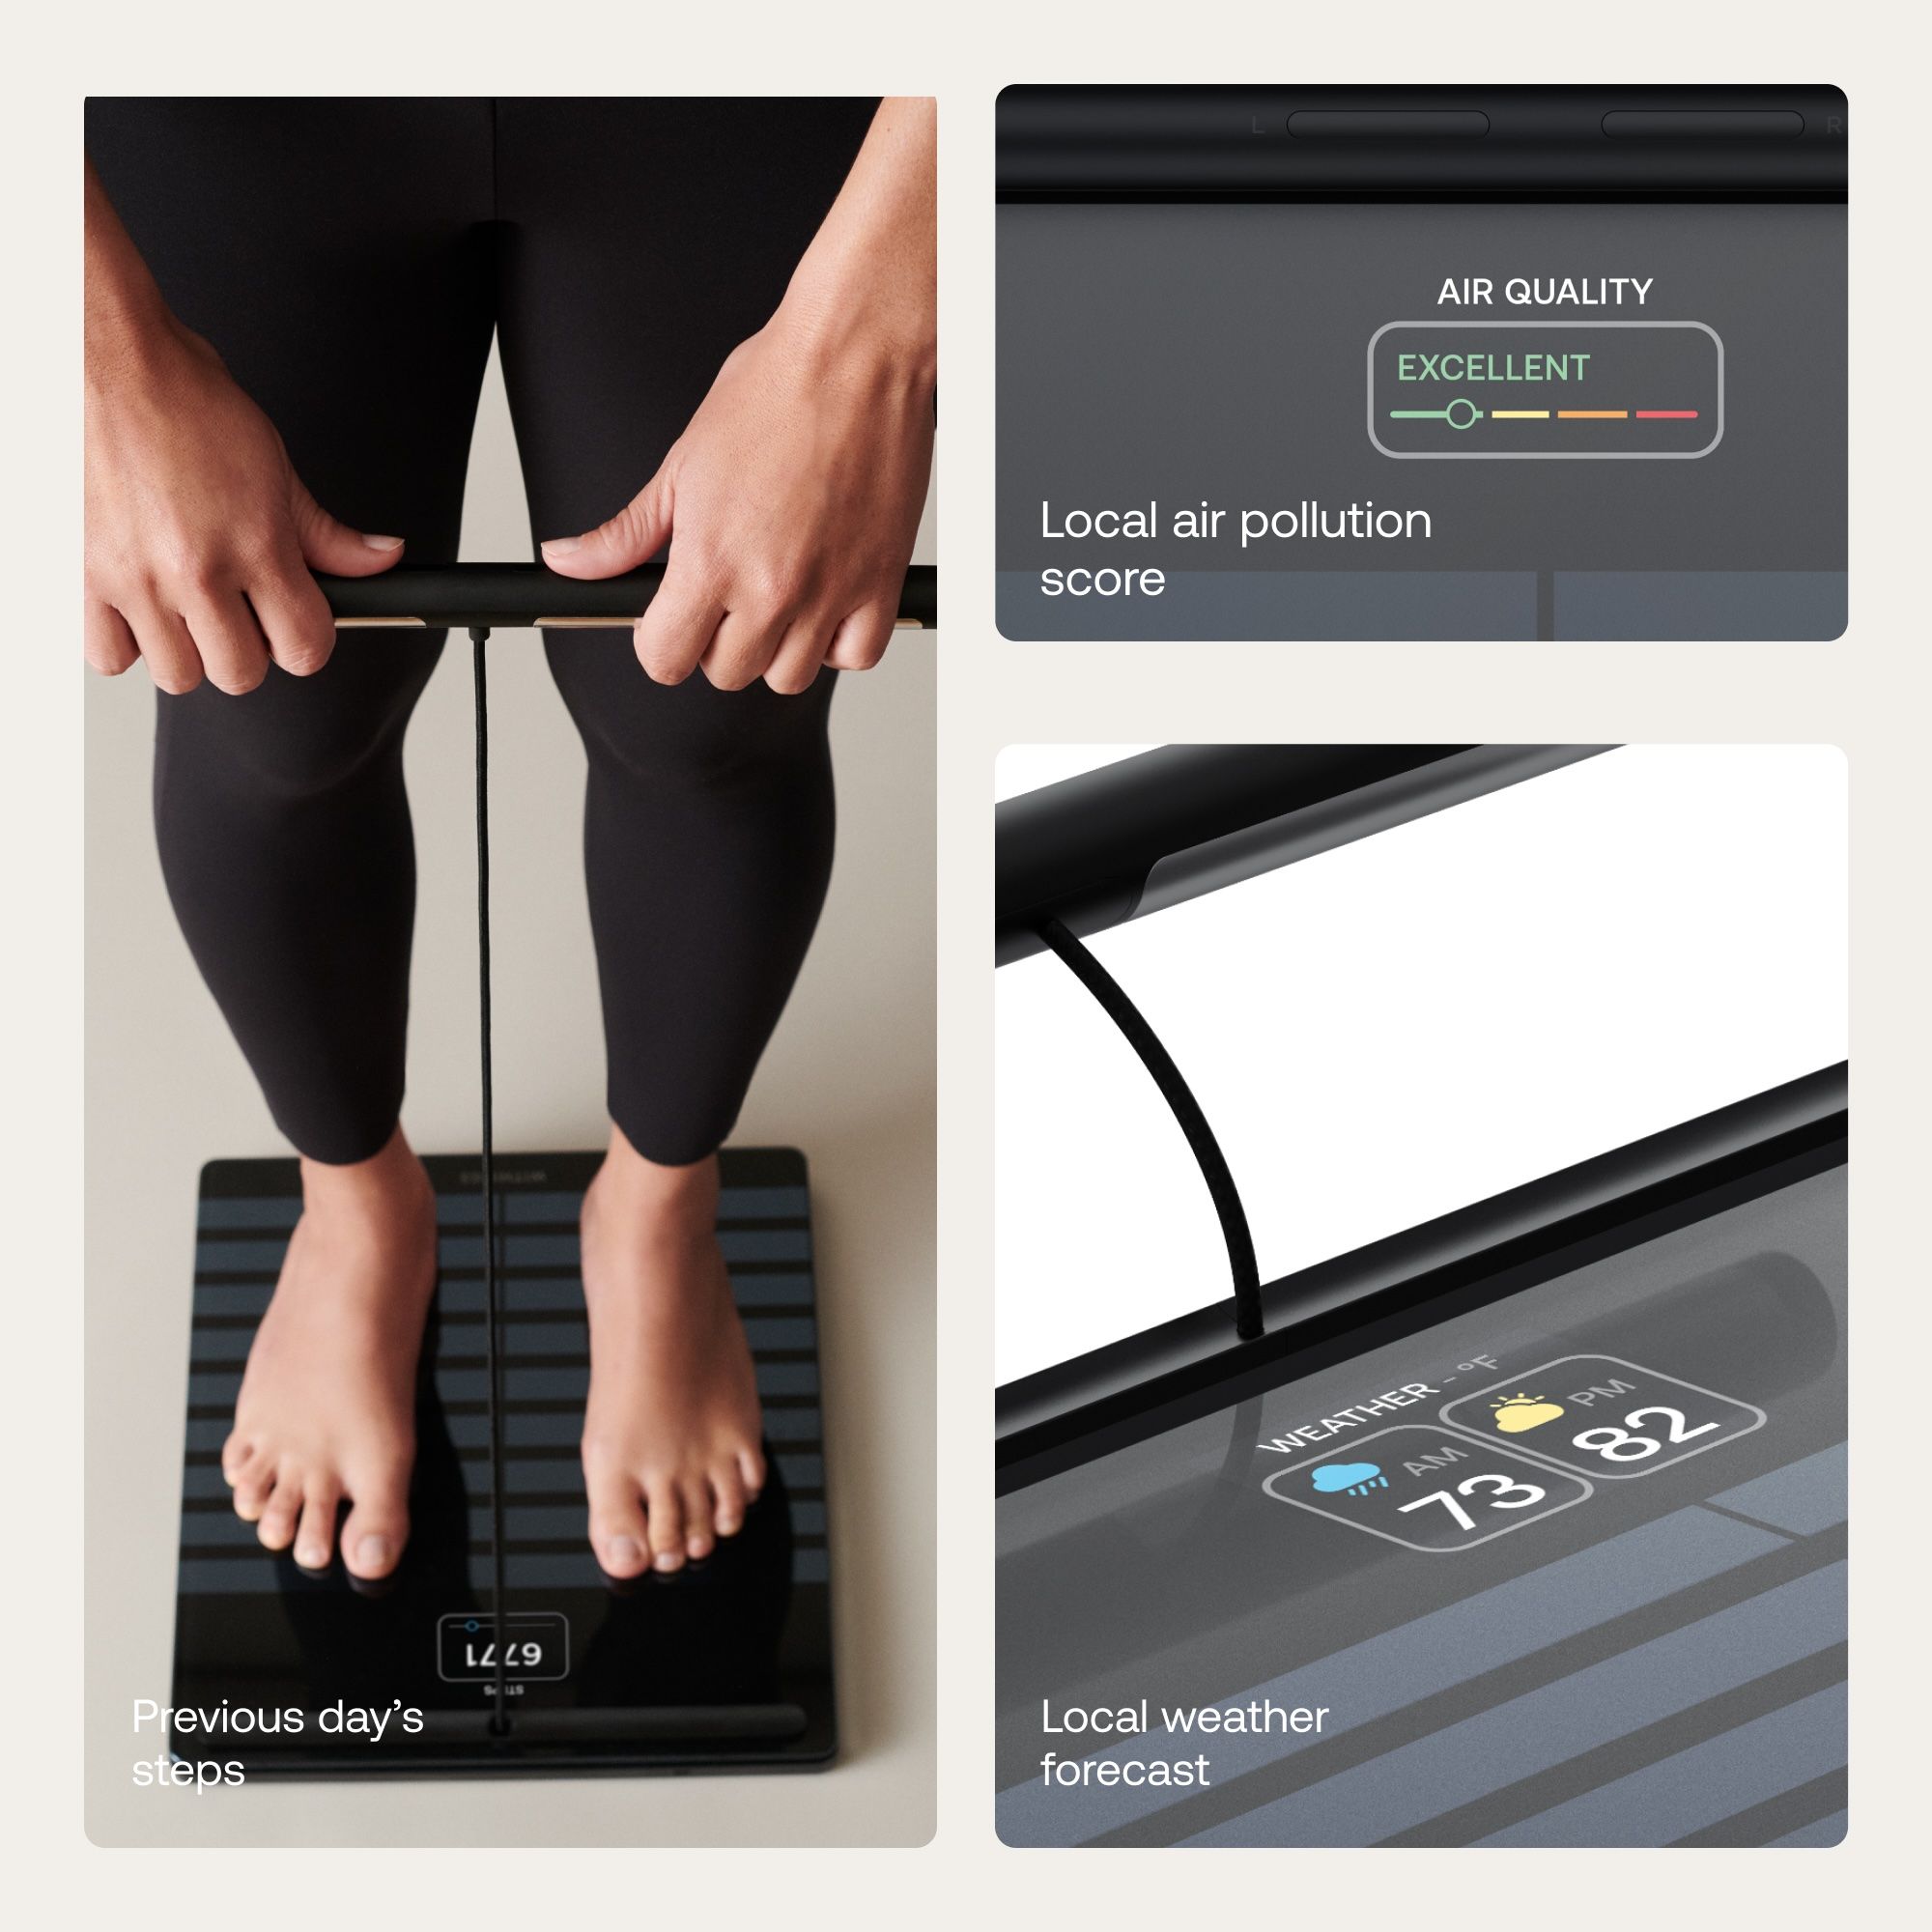 Withings Body Scan - Black